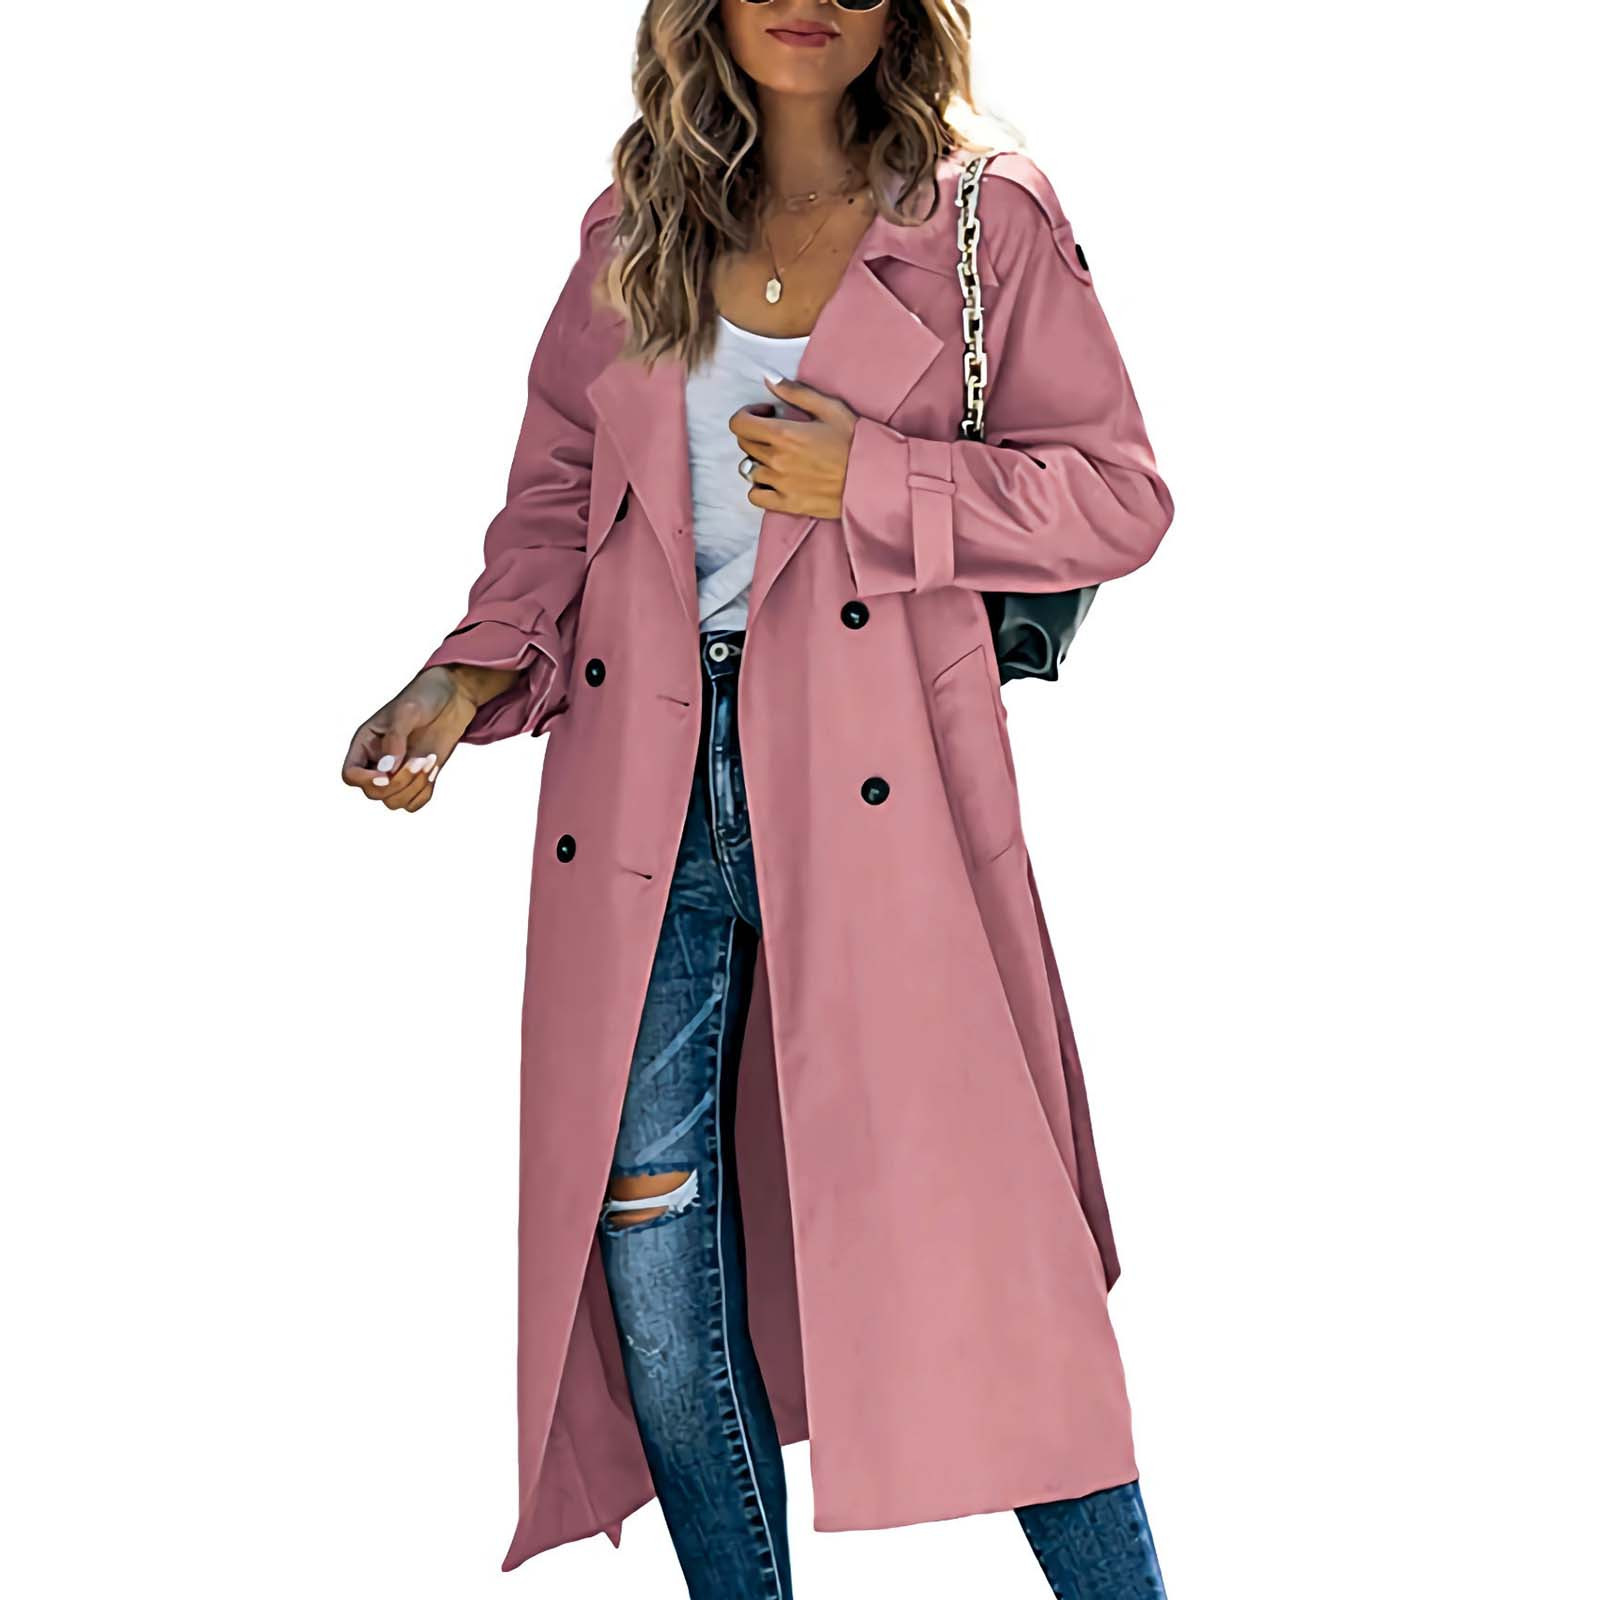 YFPWM Women Classic Double Breasted Coats Slim Long Jacket Winter Long Trench Coat Long Sleeve Double Breasted Coat Trench Coat Long Sleeve Coat Jacket Pink XL - image 2 of 7